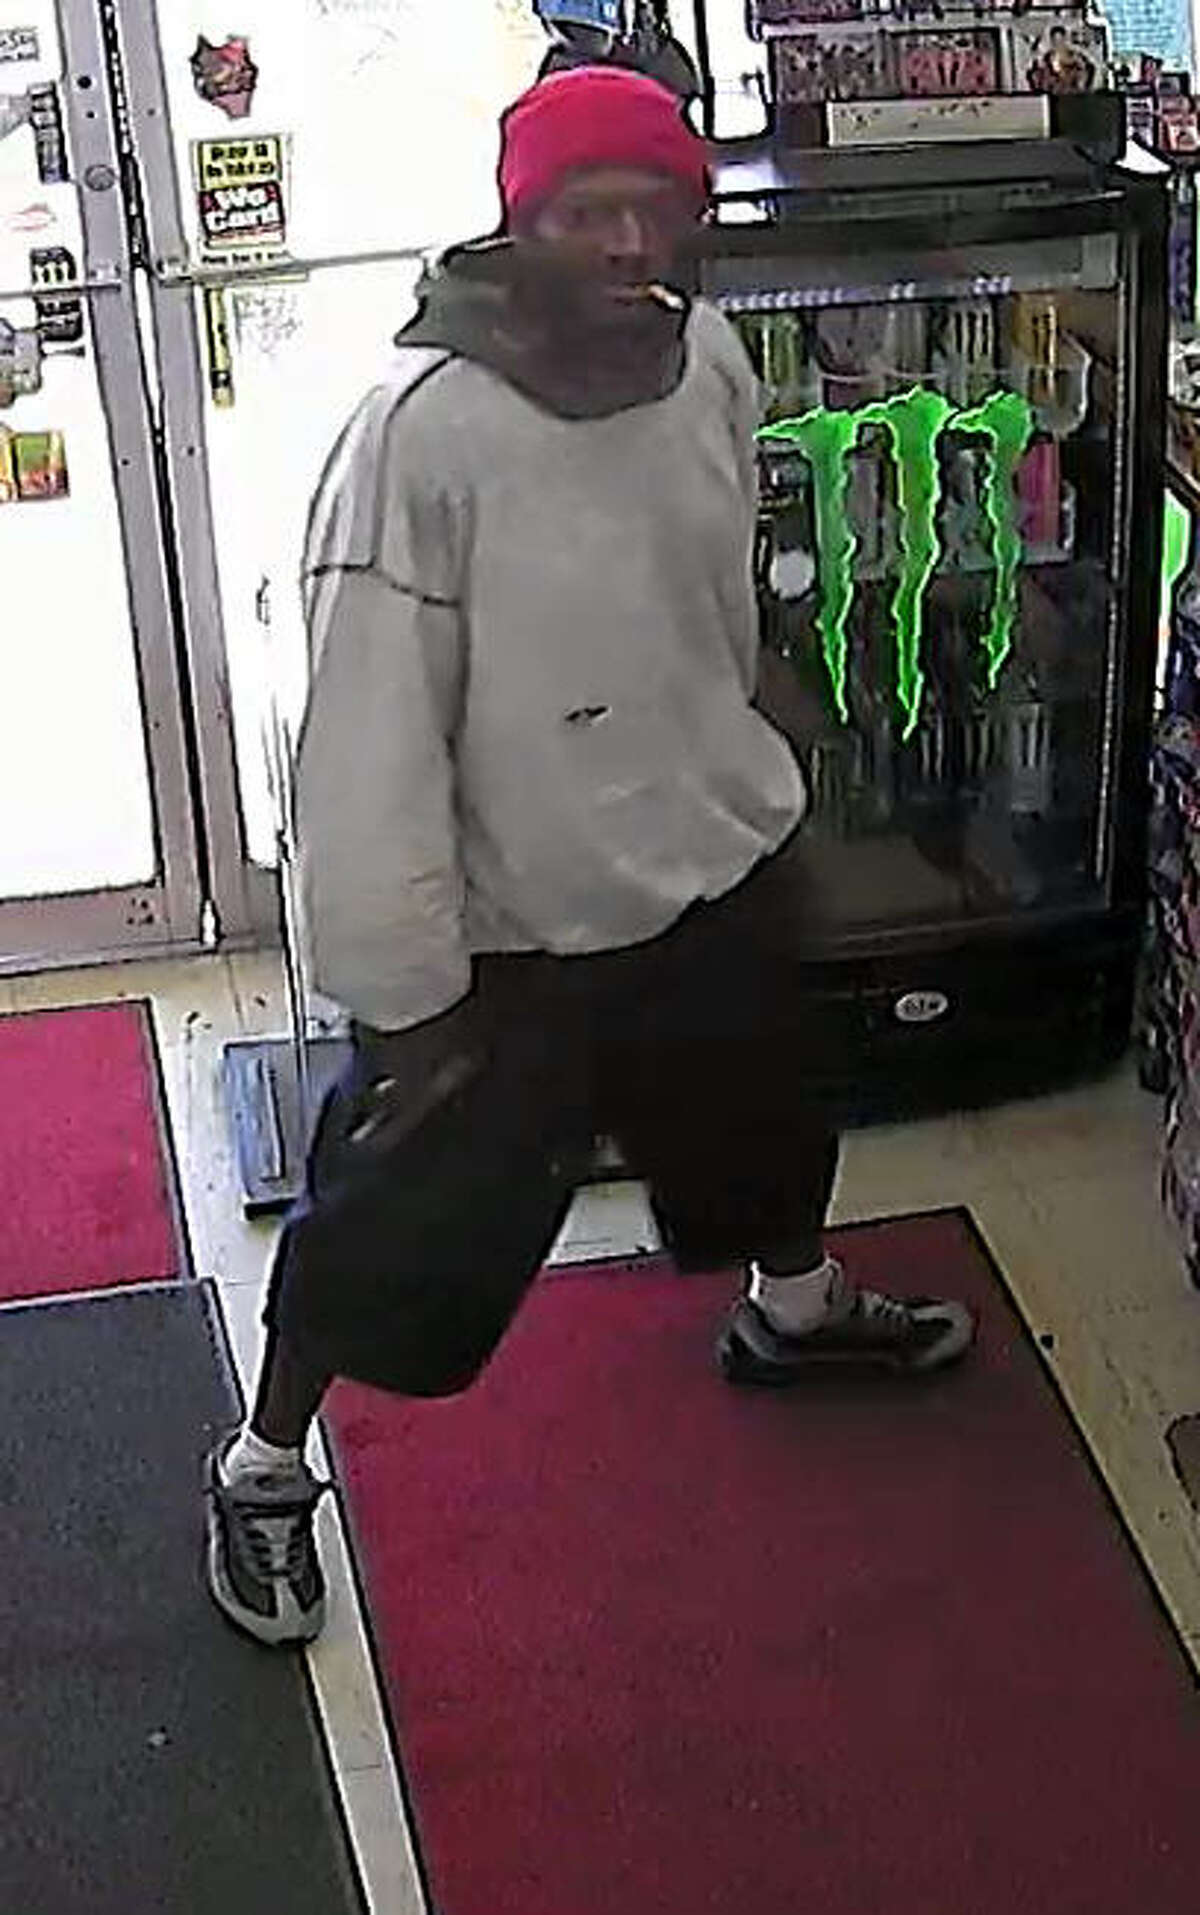 Police described the two robbers who stormed into a Baytown store and shot the clerk on April 9 as two black males, the first approximately 5’10, approximately 200 pounds, wearing a gray hoodie, baggy shorts and a red hat. The second suspect, also about 5’10”, weighing approximately 250 pounds, was wearing a white hoodie, dark shorts and a black mask covering his face, police said.